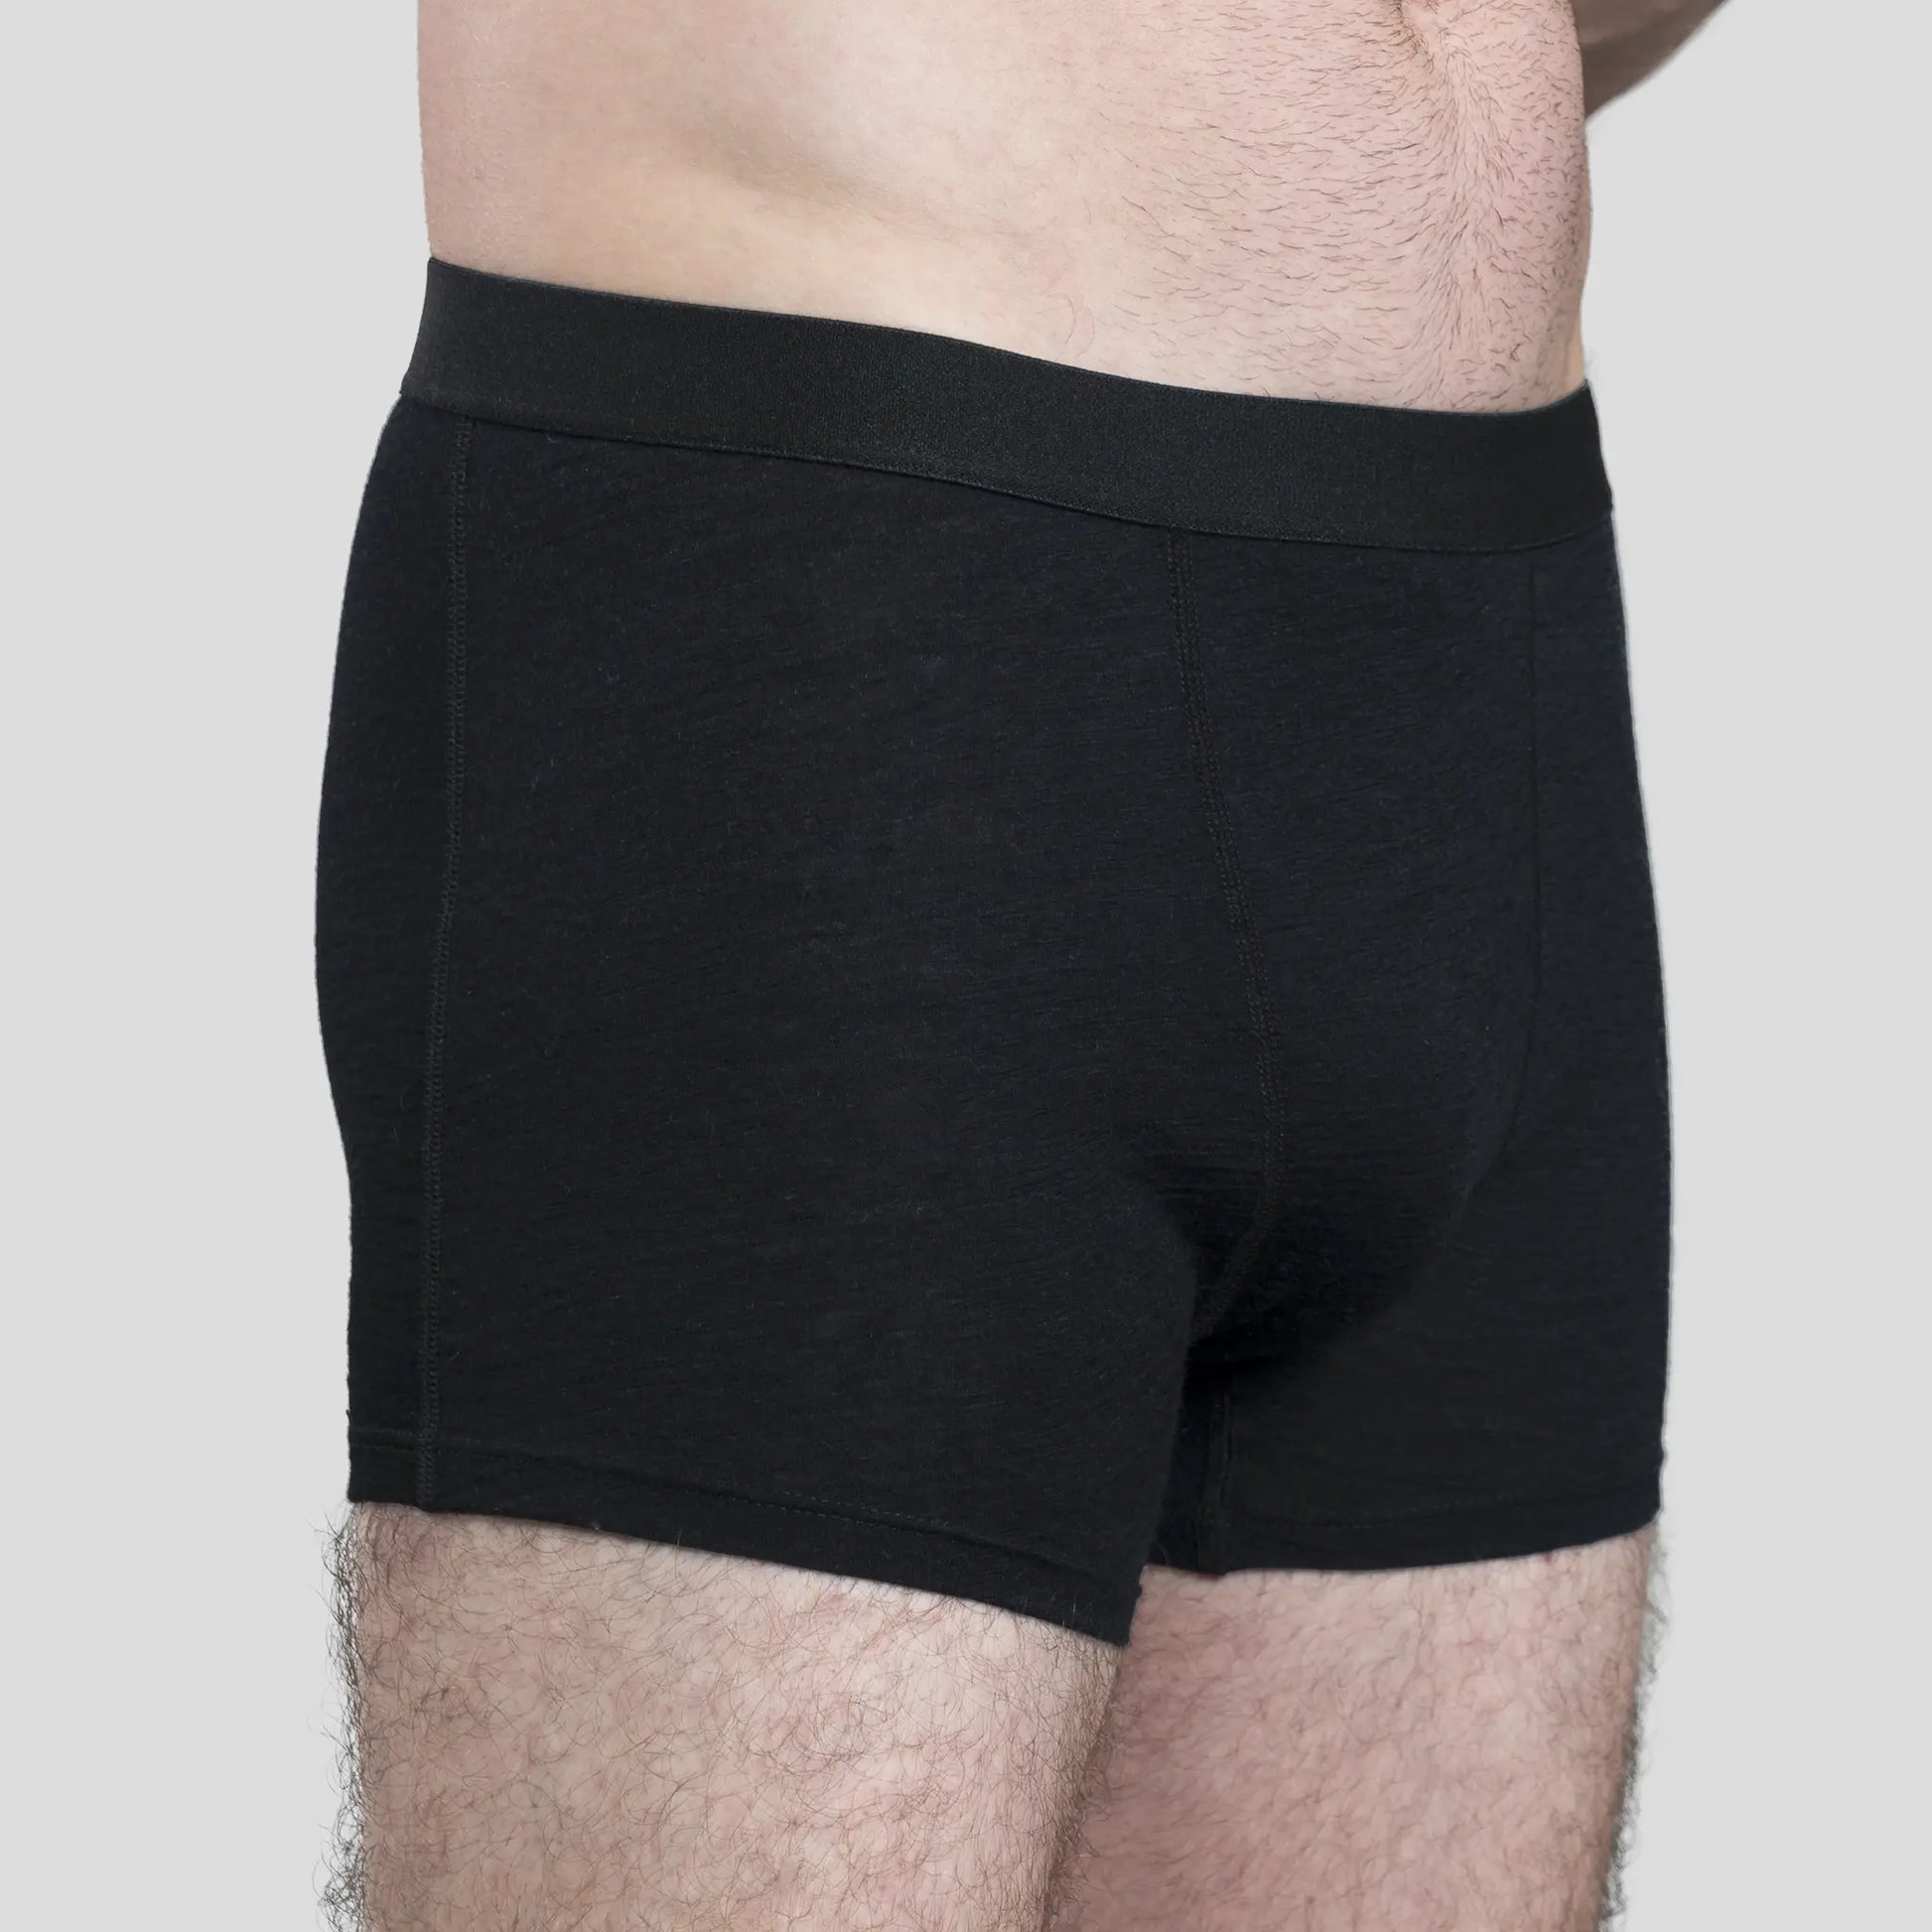 Men's Alpaca Wool Boxer Briefs: 160 Ultralight | Arms of Andes